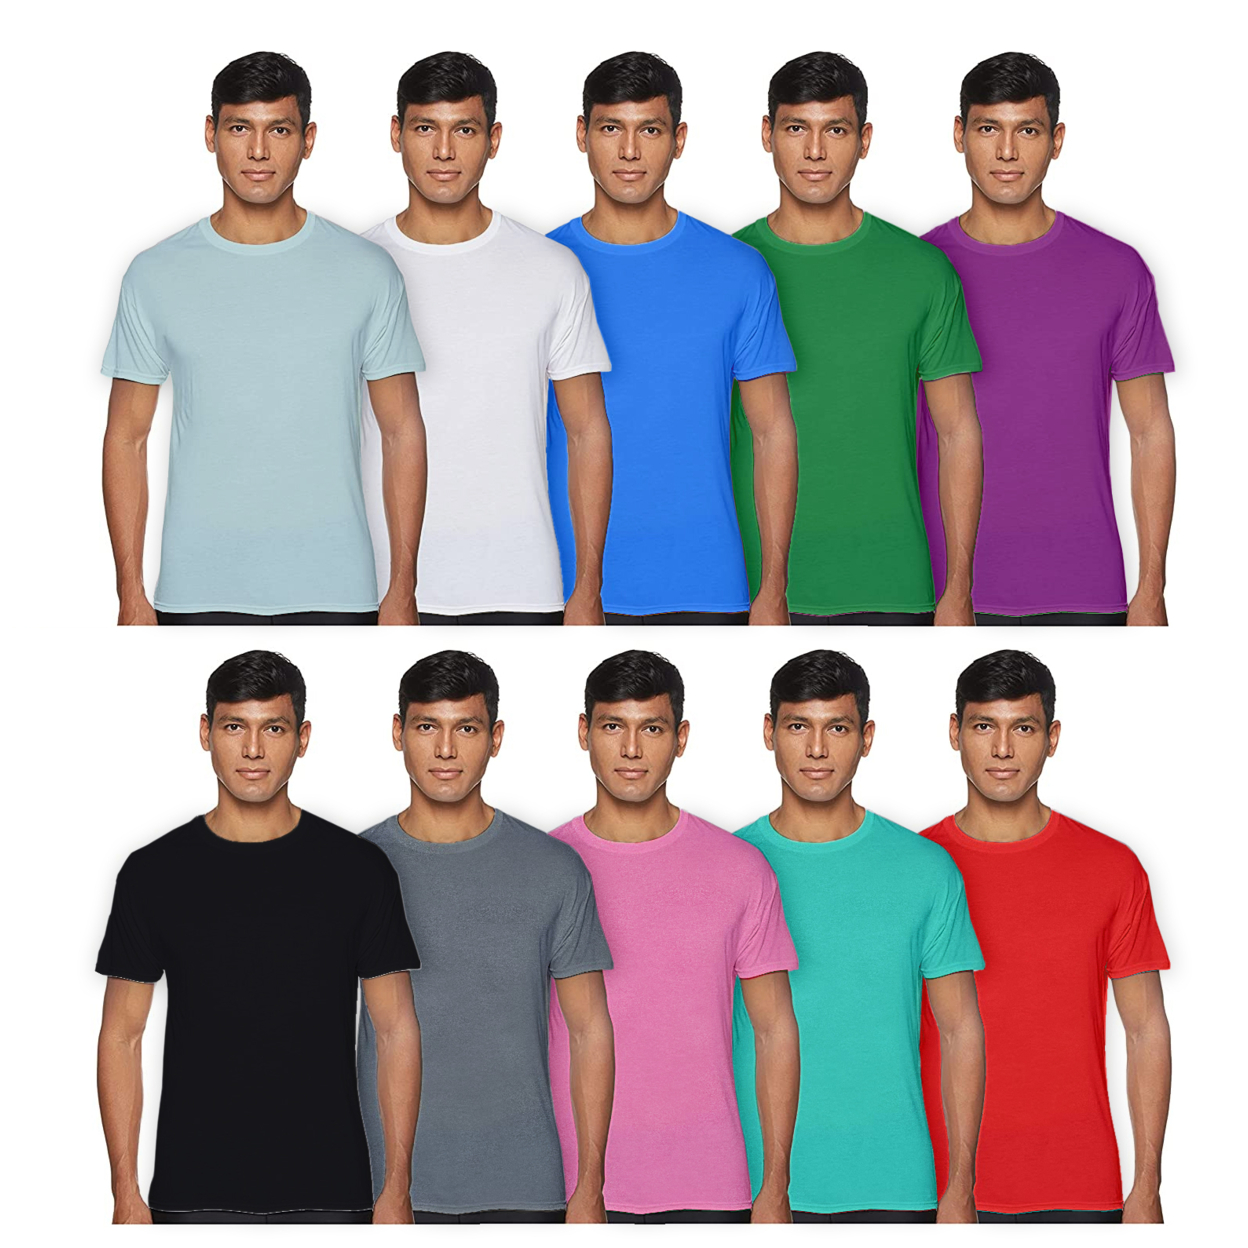 3-Pack: Men's Laviva Active Moisture Wicking Dry Fit Crew Neck Shirts - Assorted Colors, Small